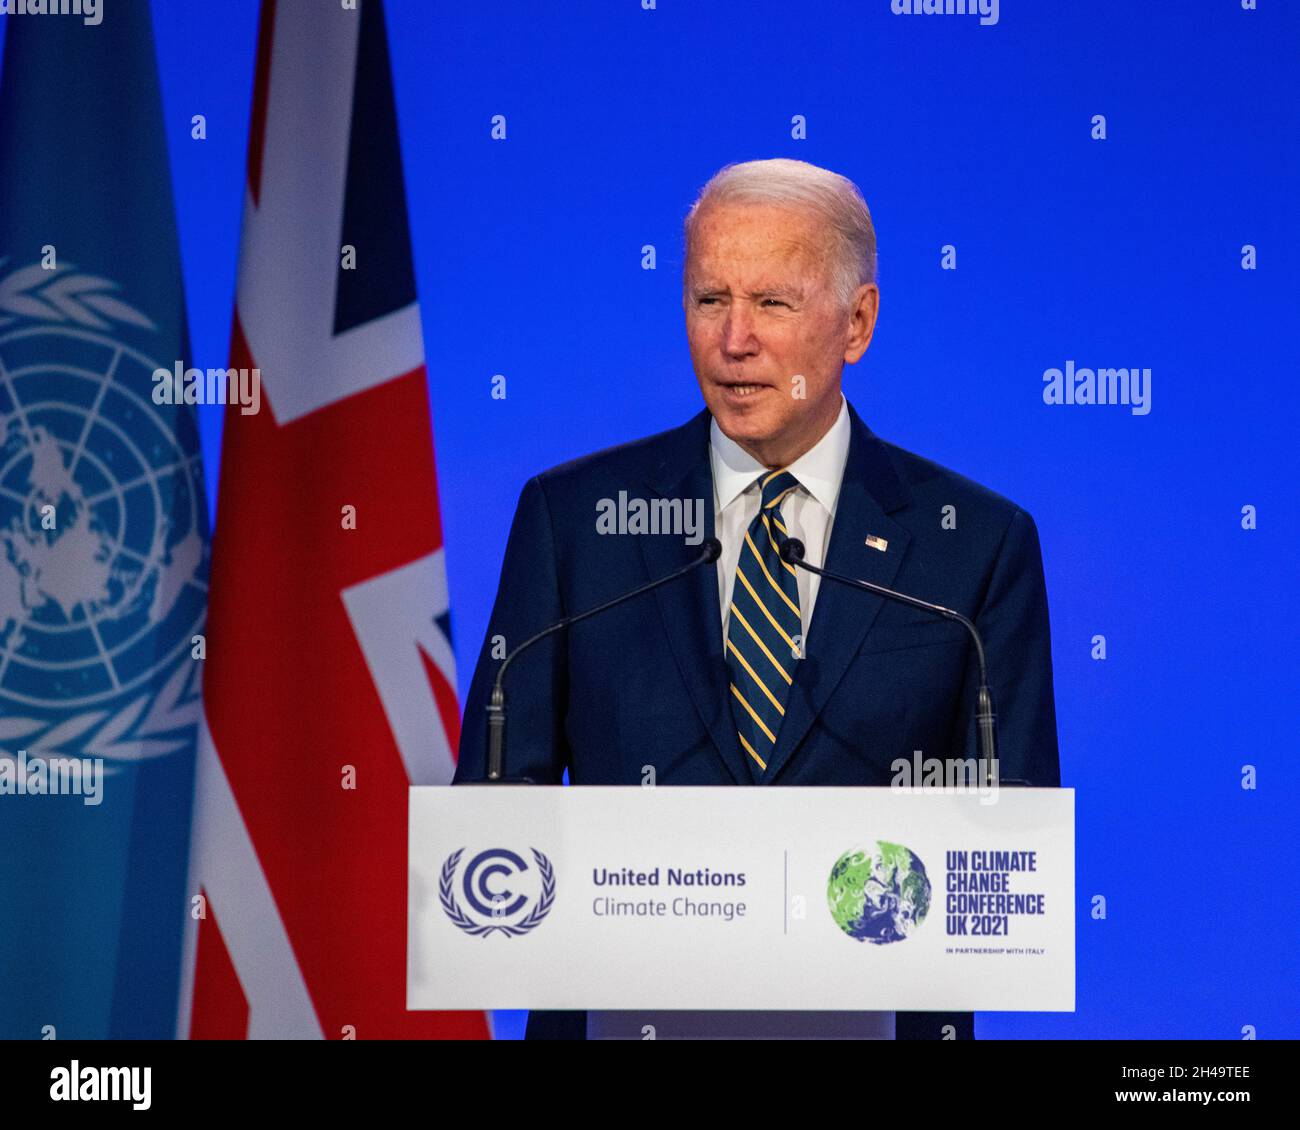 Glasgow, Scotland, UK. 1st Nov, 2021. PICTURED: Joe Biden, 46th President of the United States of America seen addressing the COP26 Climate Change Conference. Credit: Colin Fisher/Alamy Live News Stock Photo